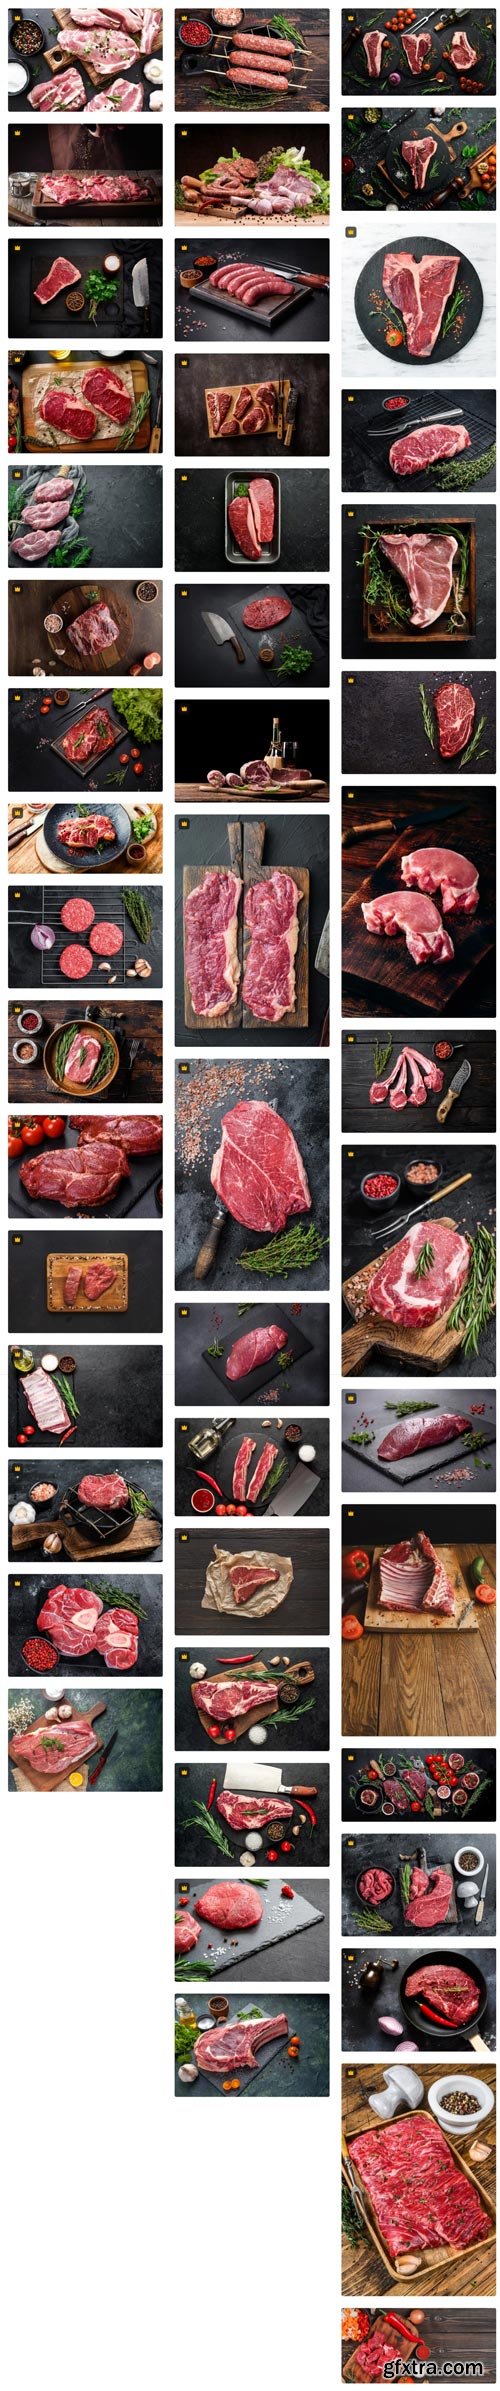 Premium Photo Collections - Raw meat - 101xJPG